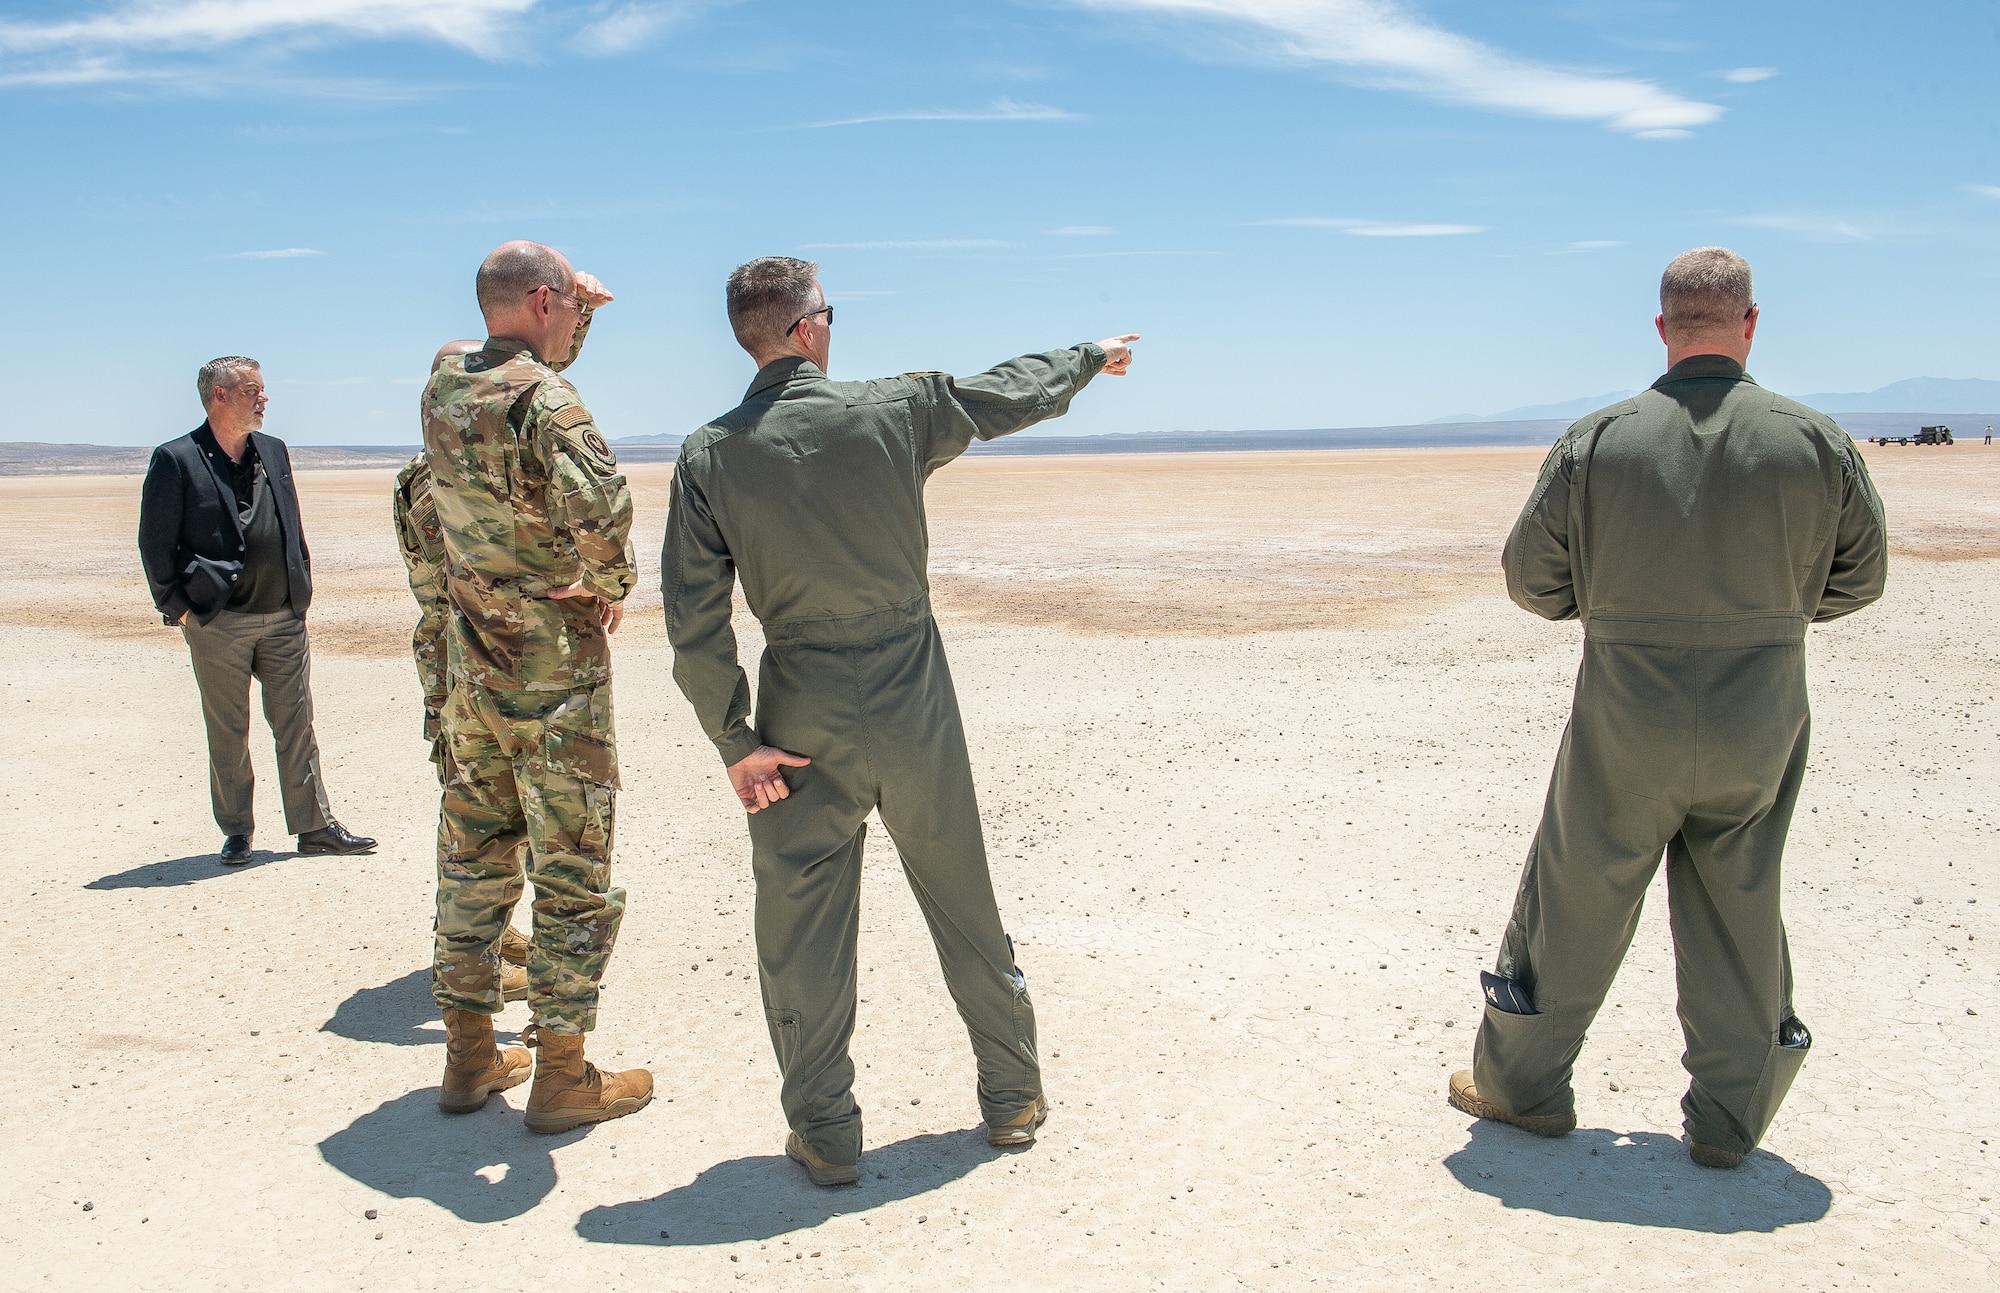 Col. Grant Mizell, 412th Operations Group commander, highlights a test sortie flown by the Emerging Technology Combined Test Force to Gen. Duke Z. Richardson, Air Force Materiel Command commander, on Rogers Dry Lake Bed on Edwards Air Force Base, California, July 13. Richardson learned about the various CTFs within the 412th Test Wing and their missions during his first visit to Edwards AFB. (U.S. Air Force photo by James West)